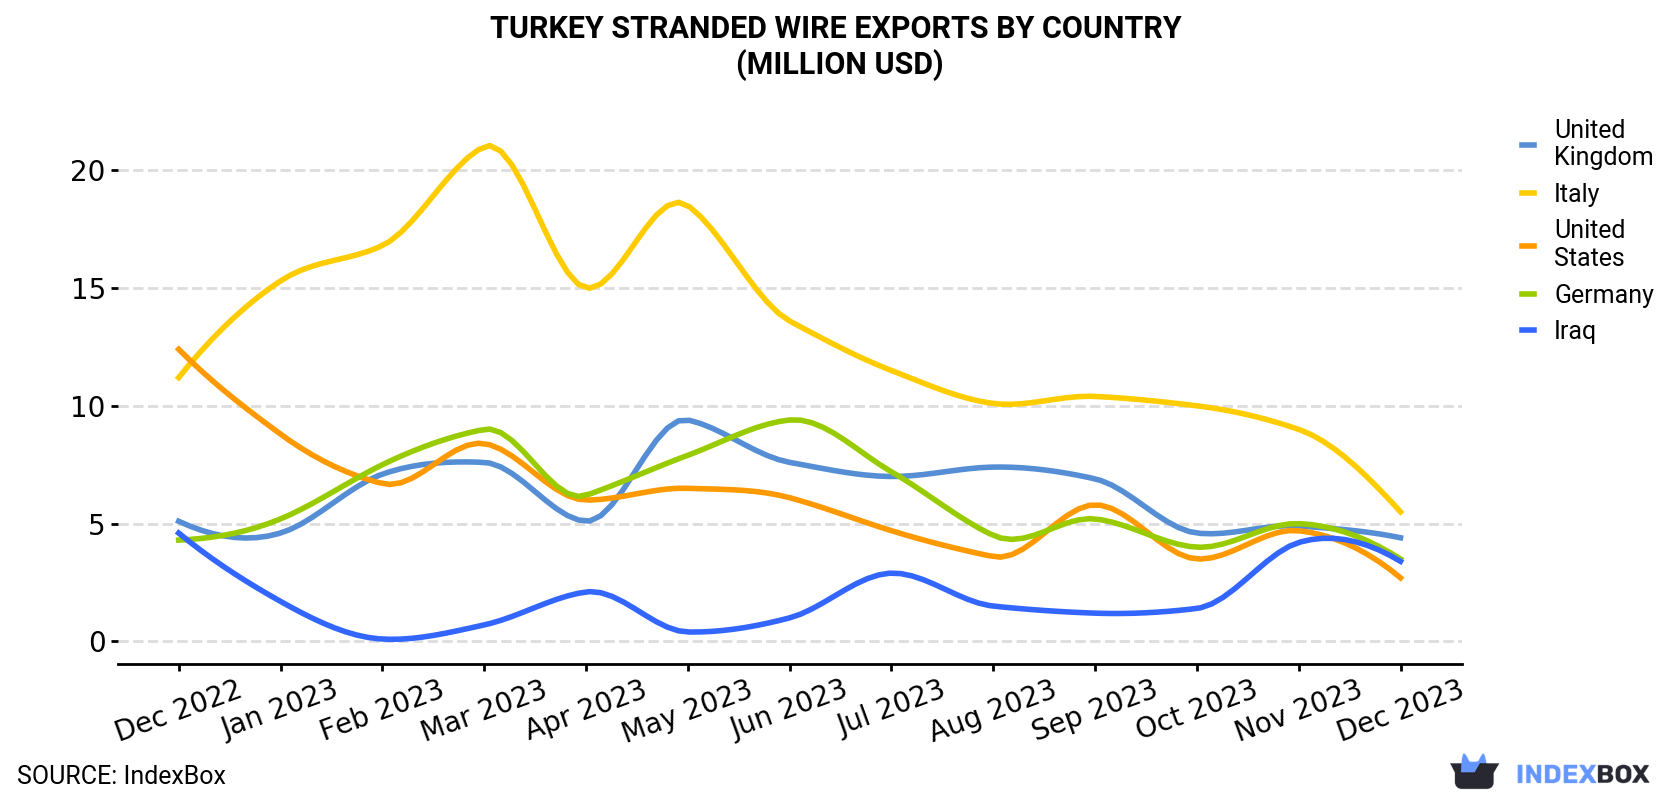 Turkey Stranded Wire Exports By Country (Million USD)